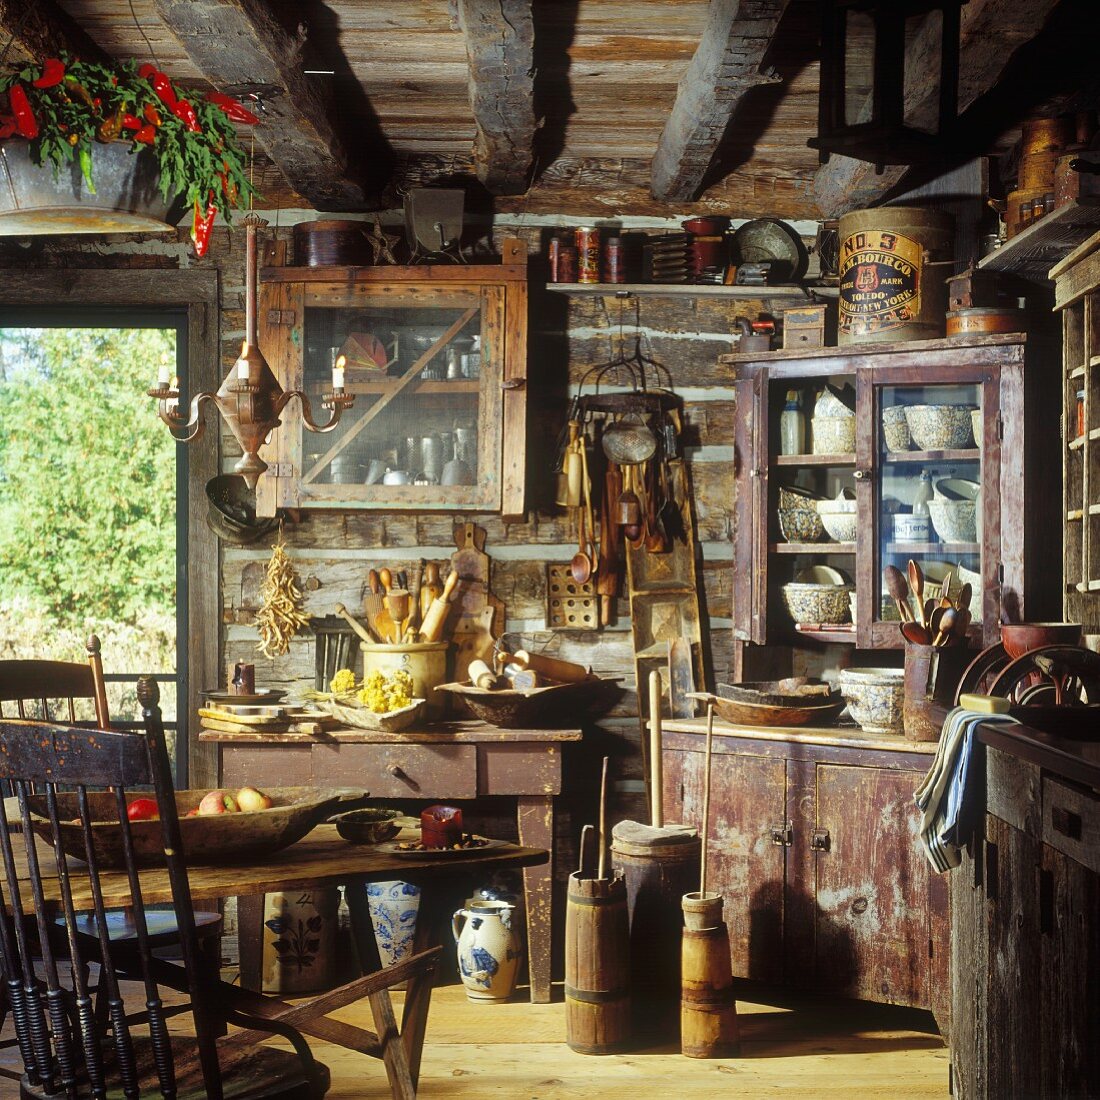 Kitchen in rustic log cabin with wood-beamed ceiling and antique kitchen utensils